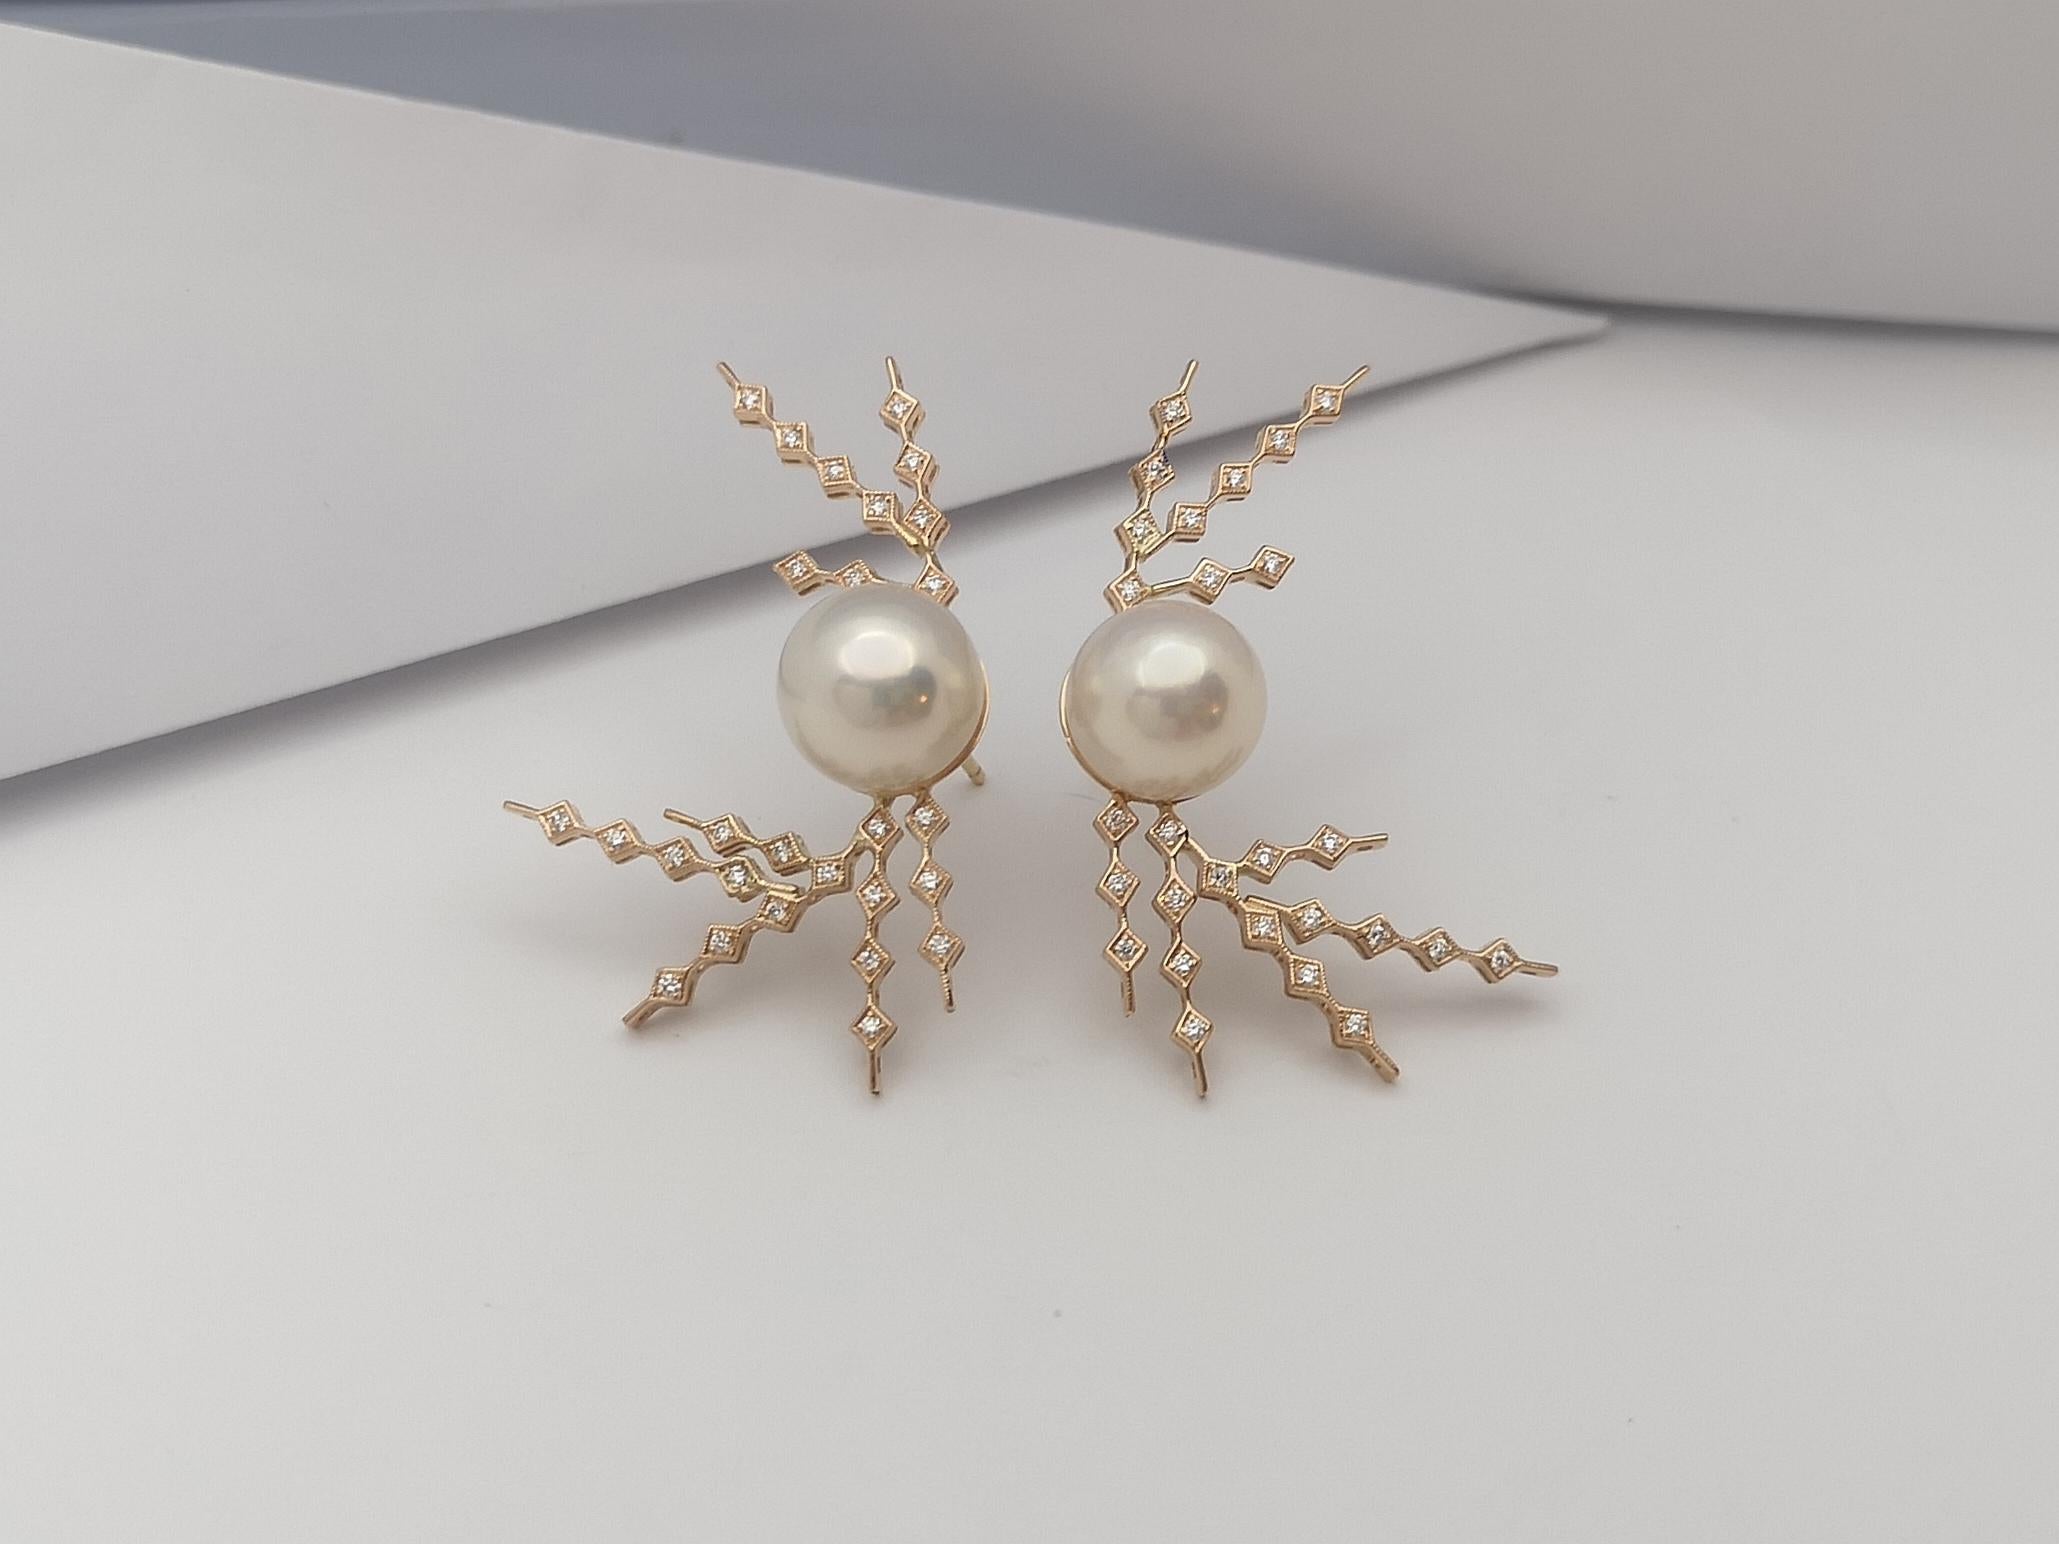 Brilliant Cut Pearl with Diamond Earrings Set in 18 Karat Rose Gold For Sale